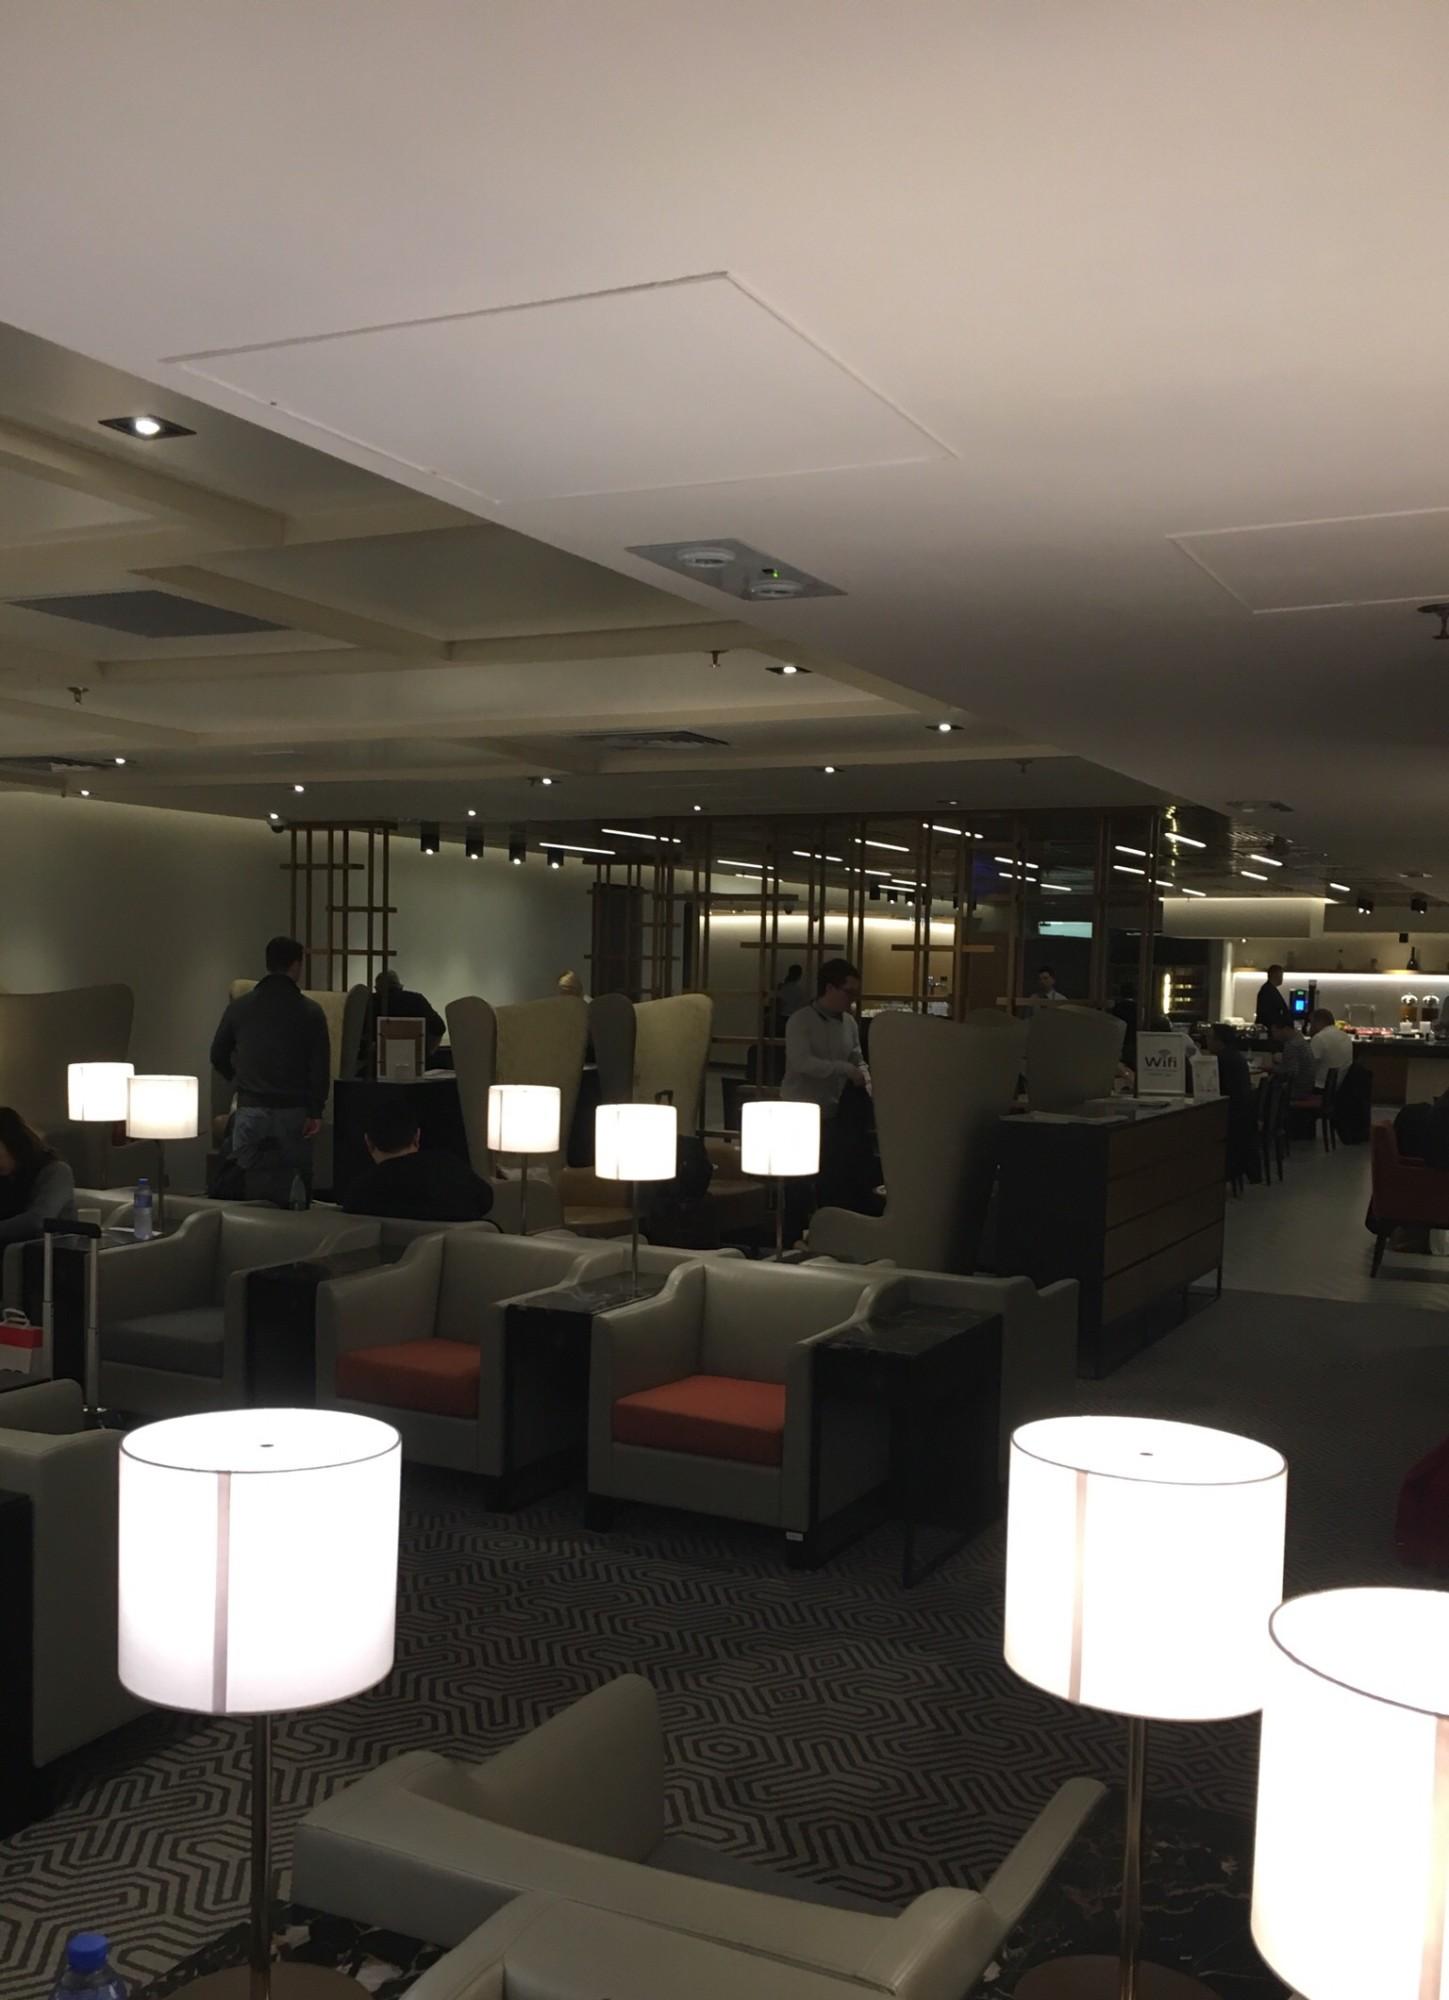 Singapore Airlines SilverKris Business Class Lounge image 48 of 68